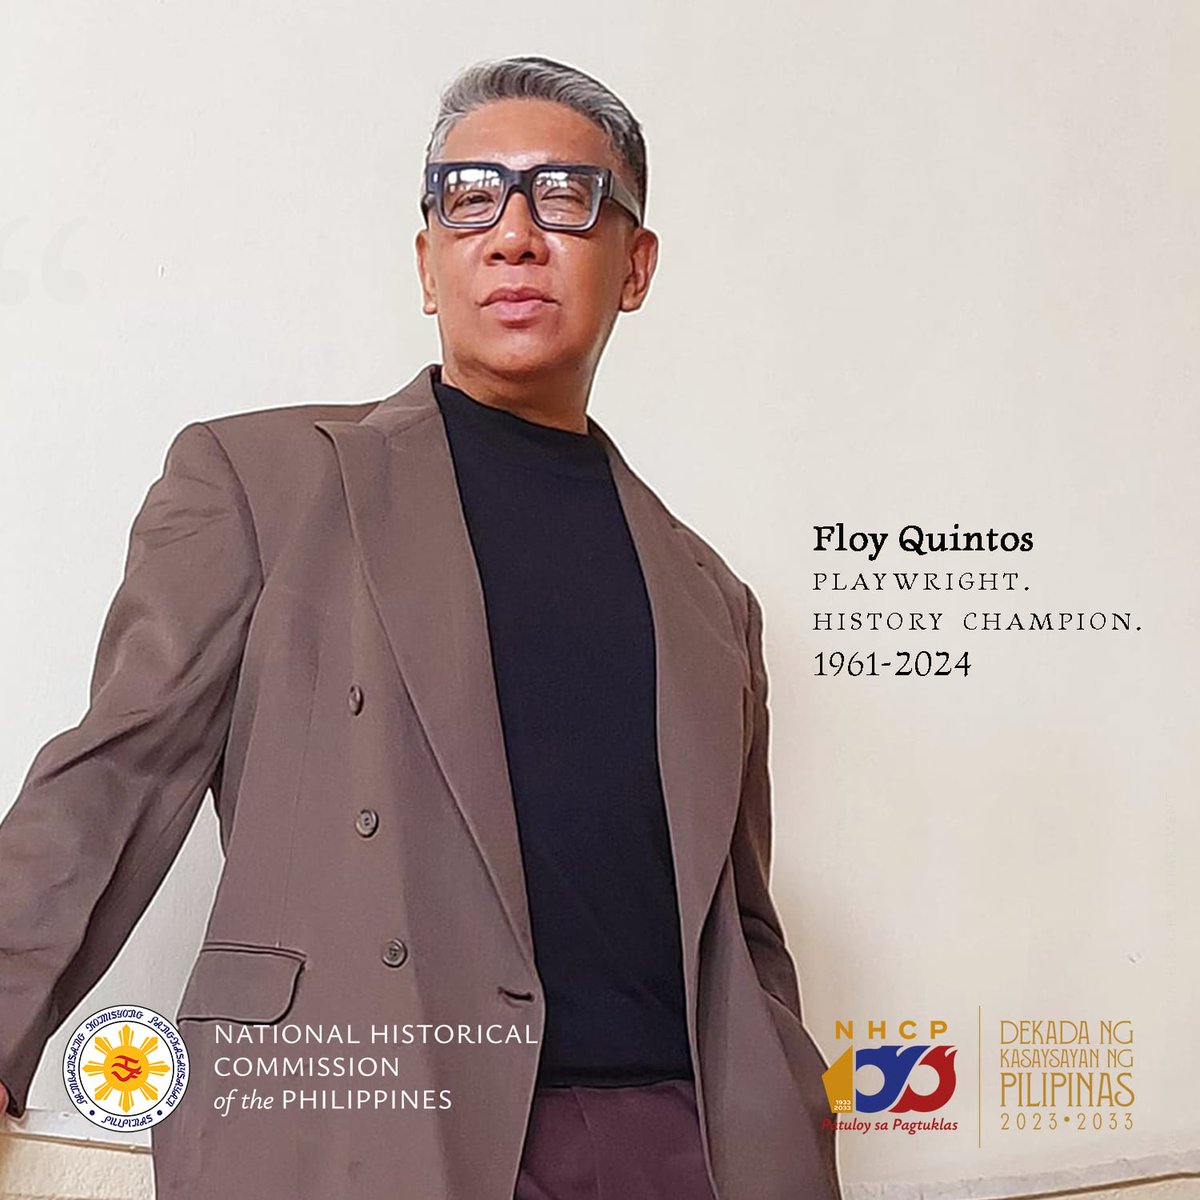 The NHCP extends its condolences to the loved ones of playwright and eminent Filipino creative Director Floy Quintos on his passing today, 27 April 2024.

The NHCP and Quintos collaborated on many projects from 2014 to 2022.

Maraming Salamat at Paalam po Direk!